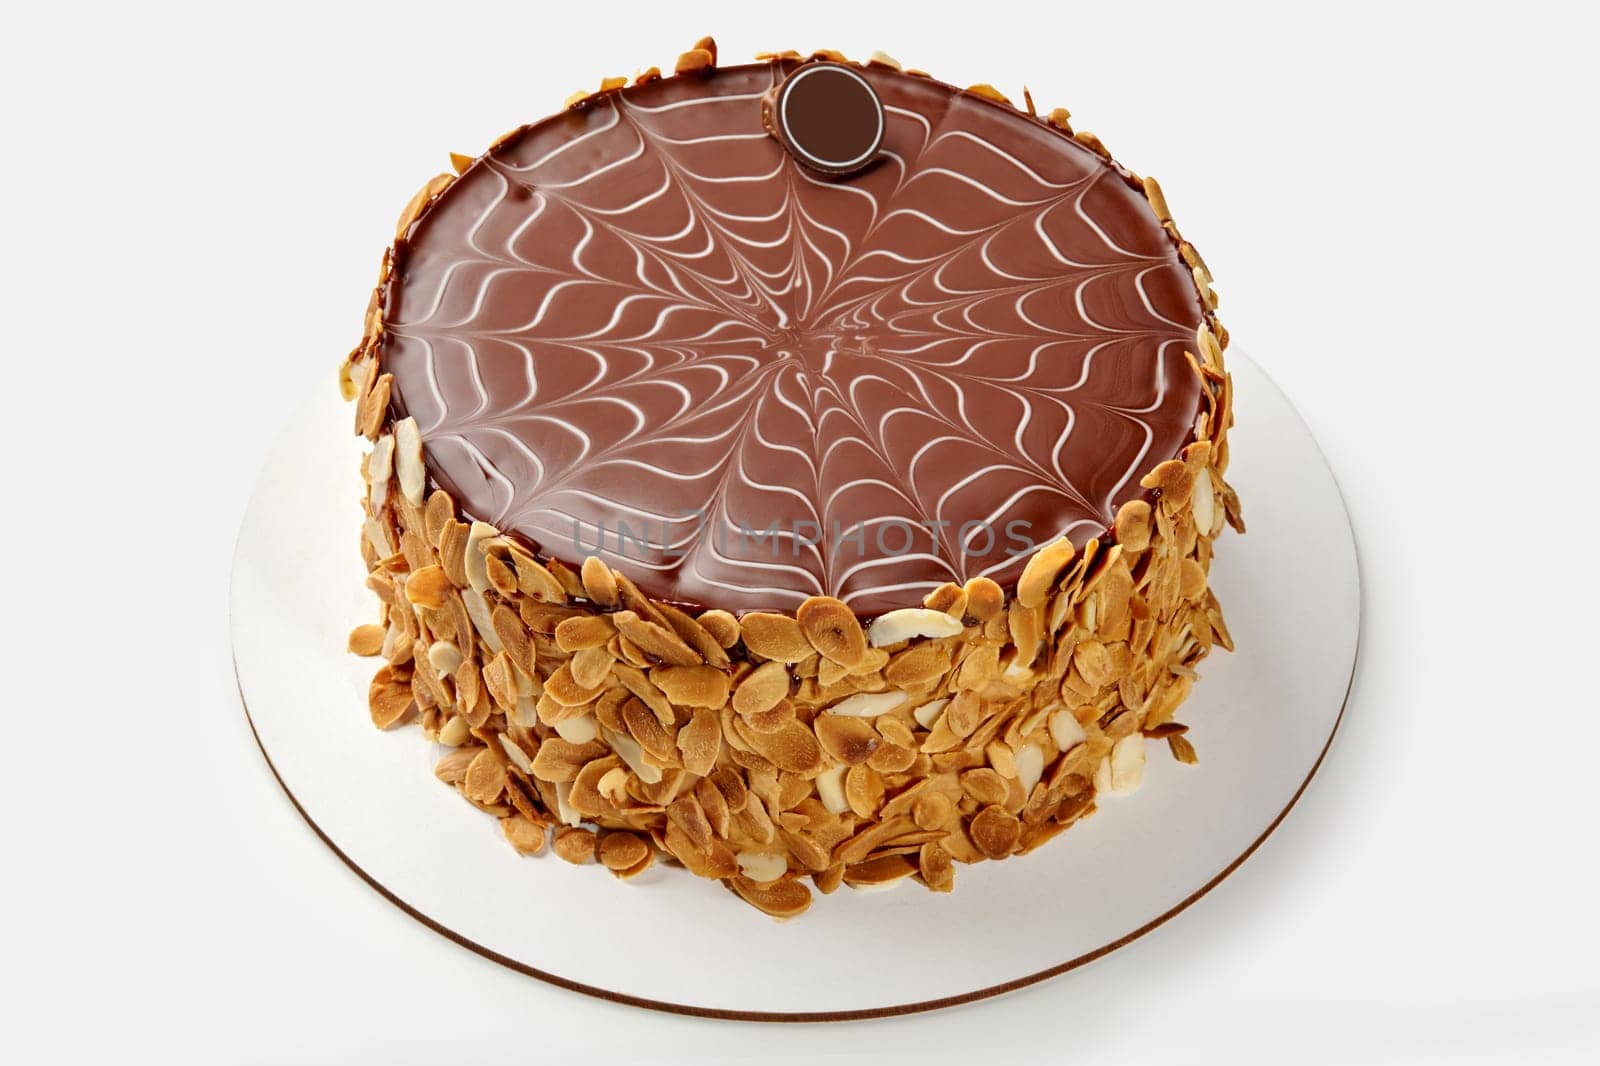 Classic Esterhazy cake with smooth, intricate chocolate icing pattern on top and crunchy almond flake coating around sides, on white backdrop. Confectionery craftsmanship